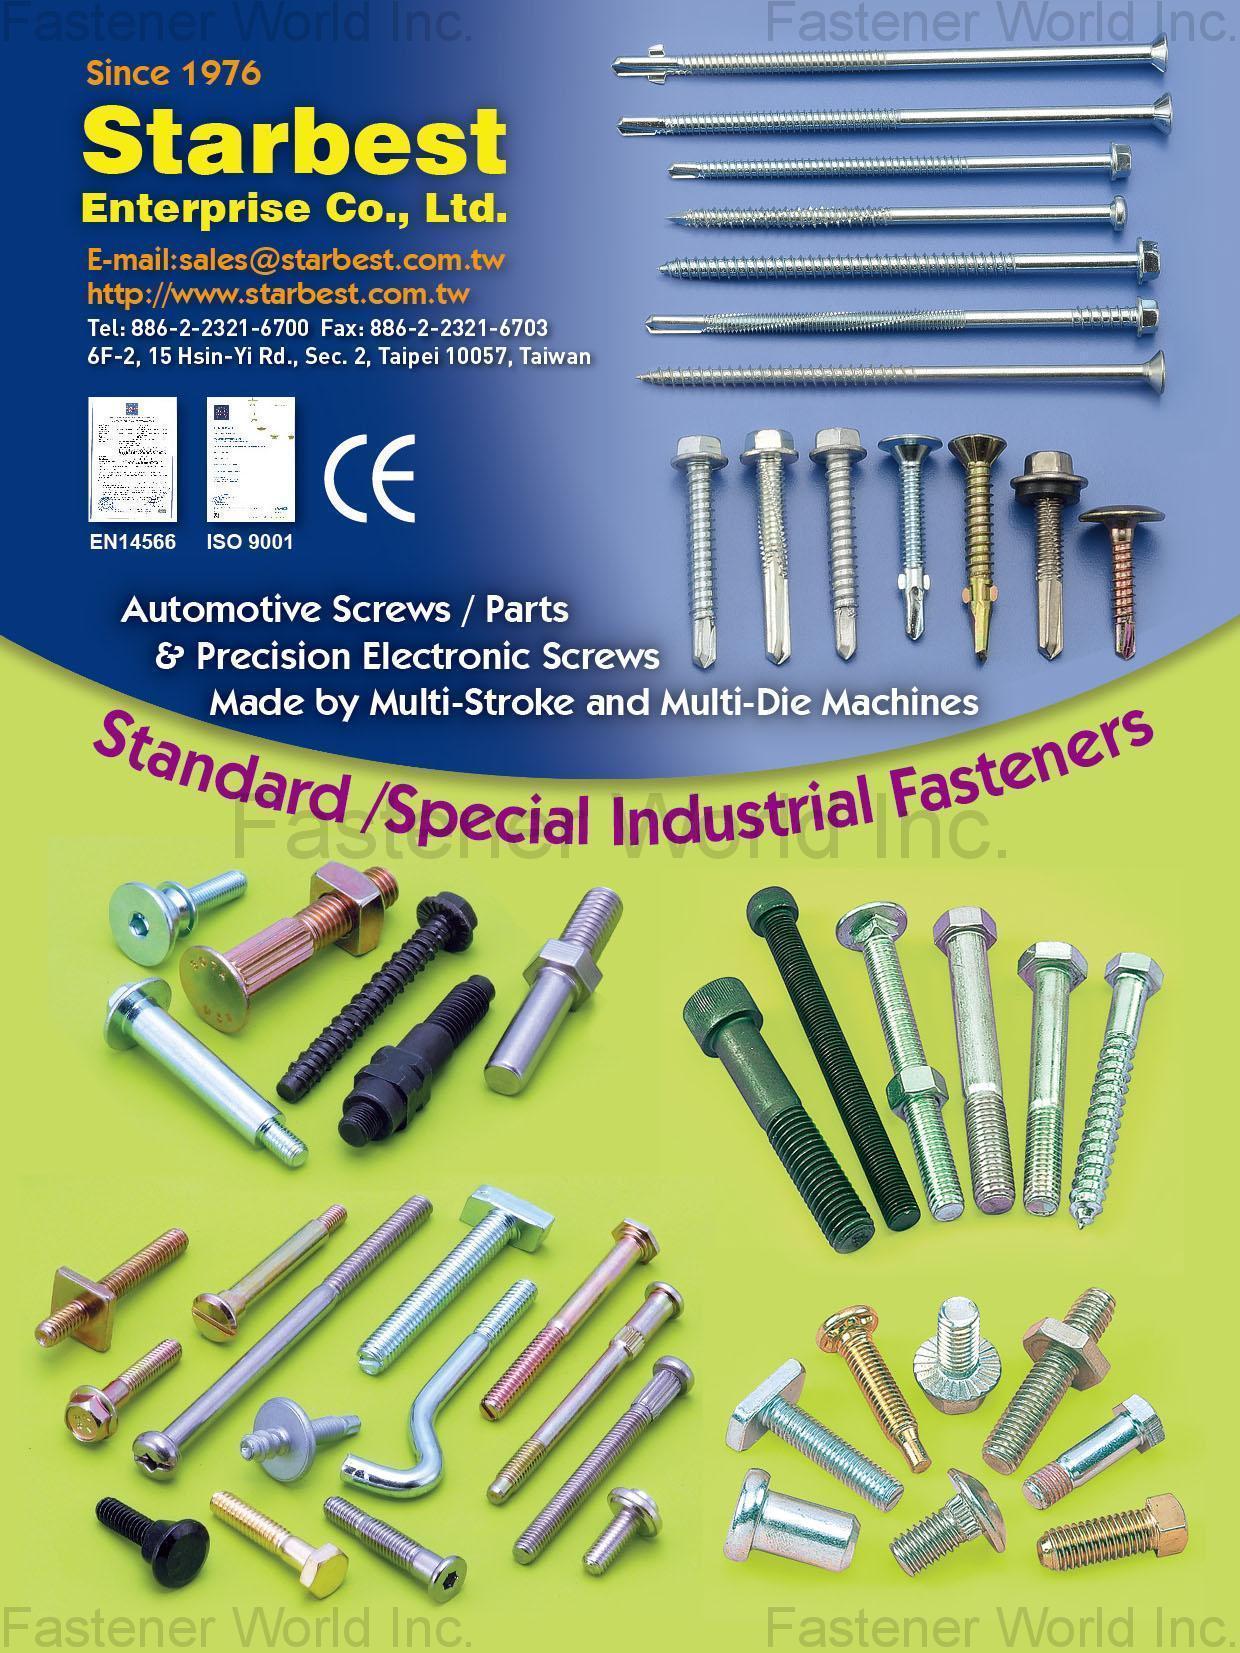 STARBEST ENTERPRISE CO., LTD.  , Standard/Special Industrial Fasteners (Automotive Screws / Parts & Precision Electronic Screws, Made by Multi-Stroke and Multi-Die Machines) , Customized Special Screws / Bolts